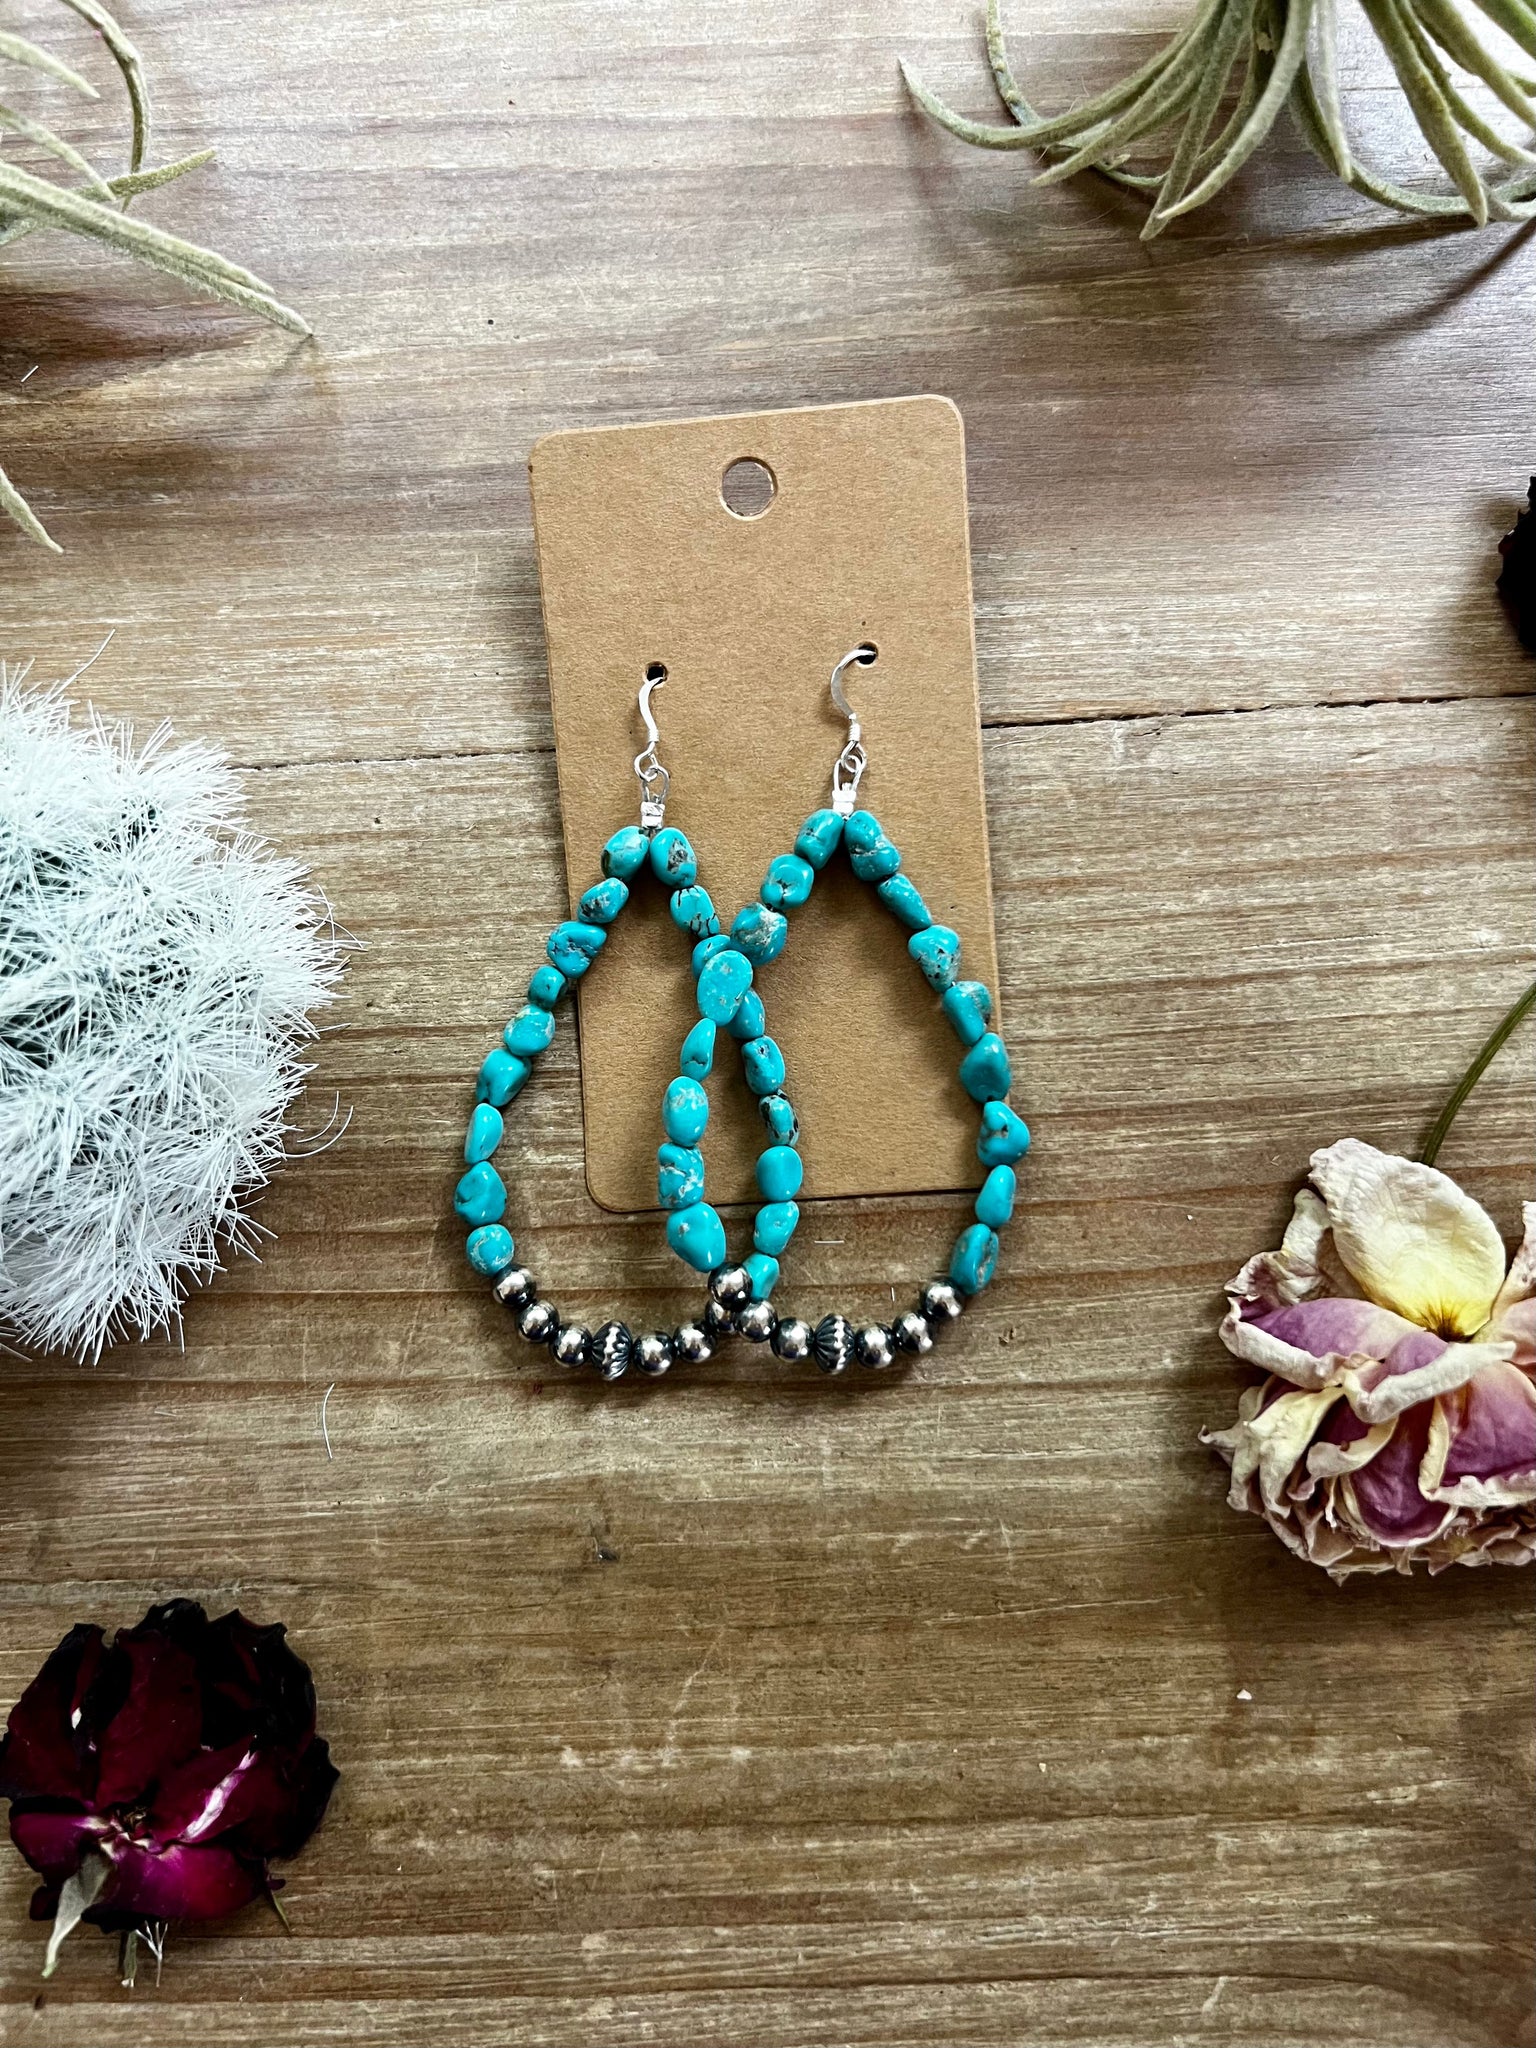 Real turquoise earrings and Navajos 5 mm